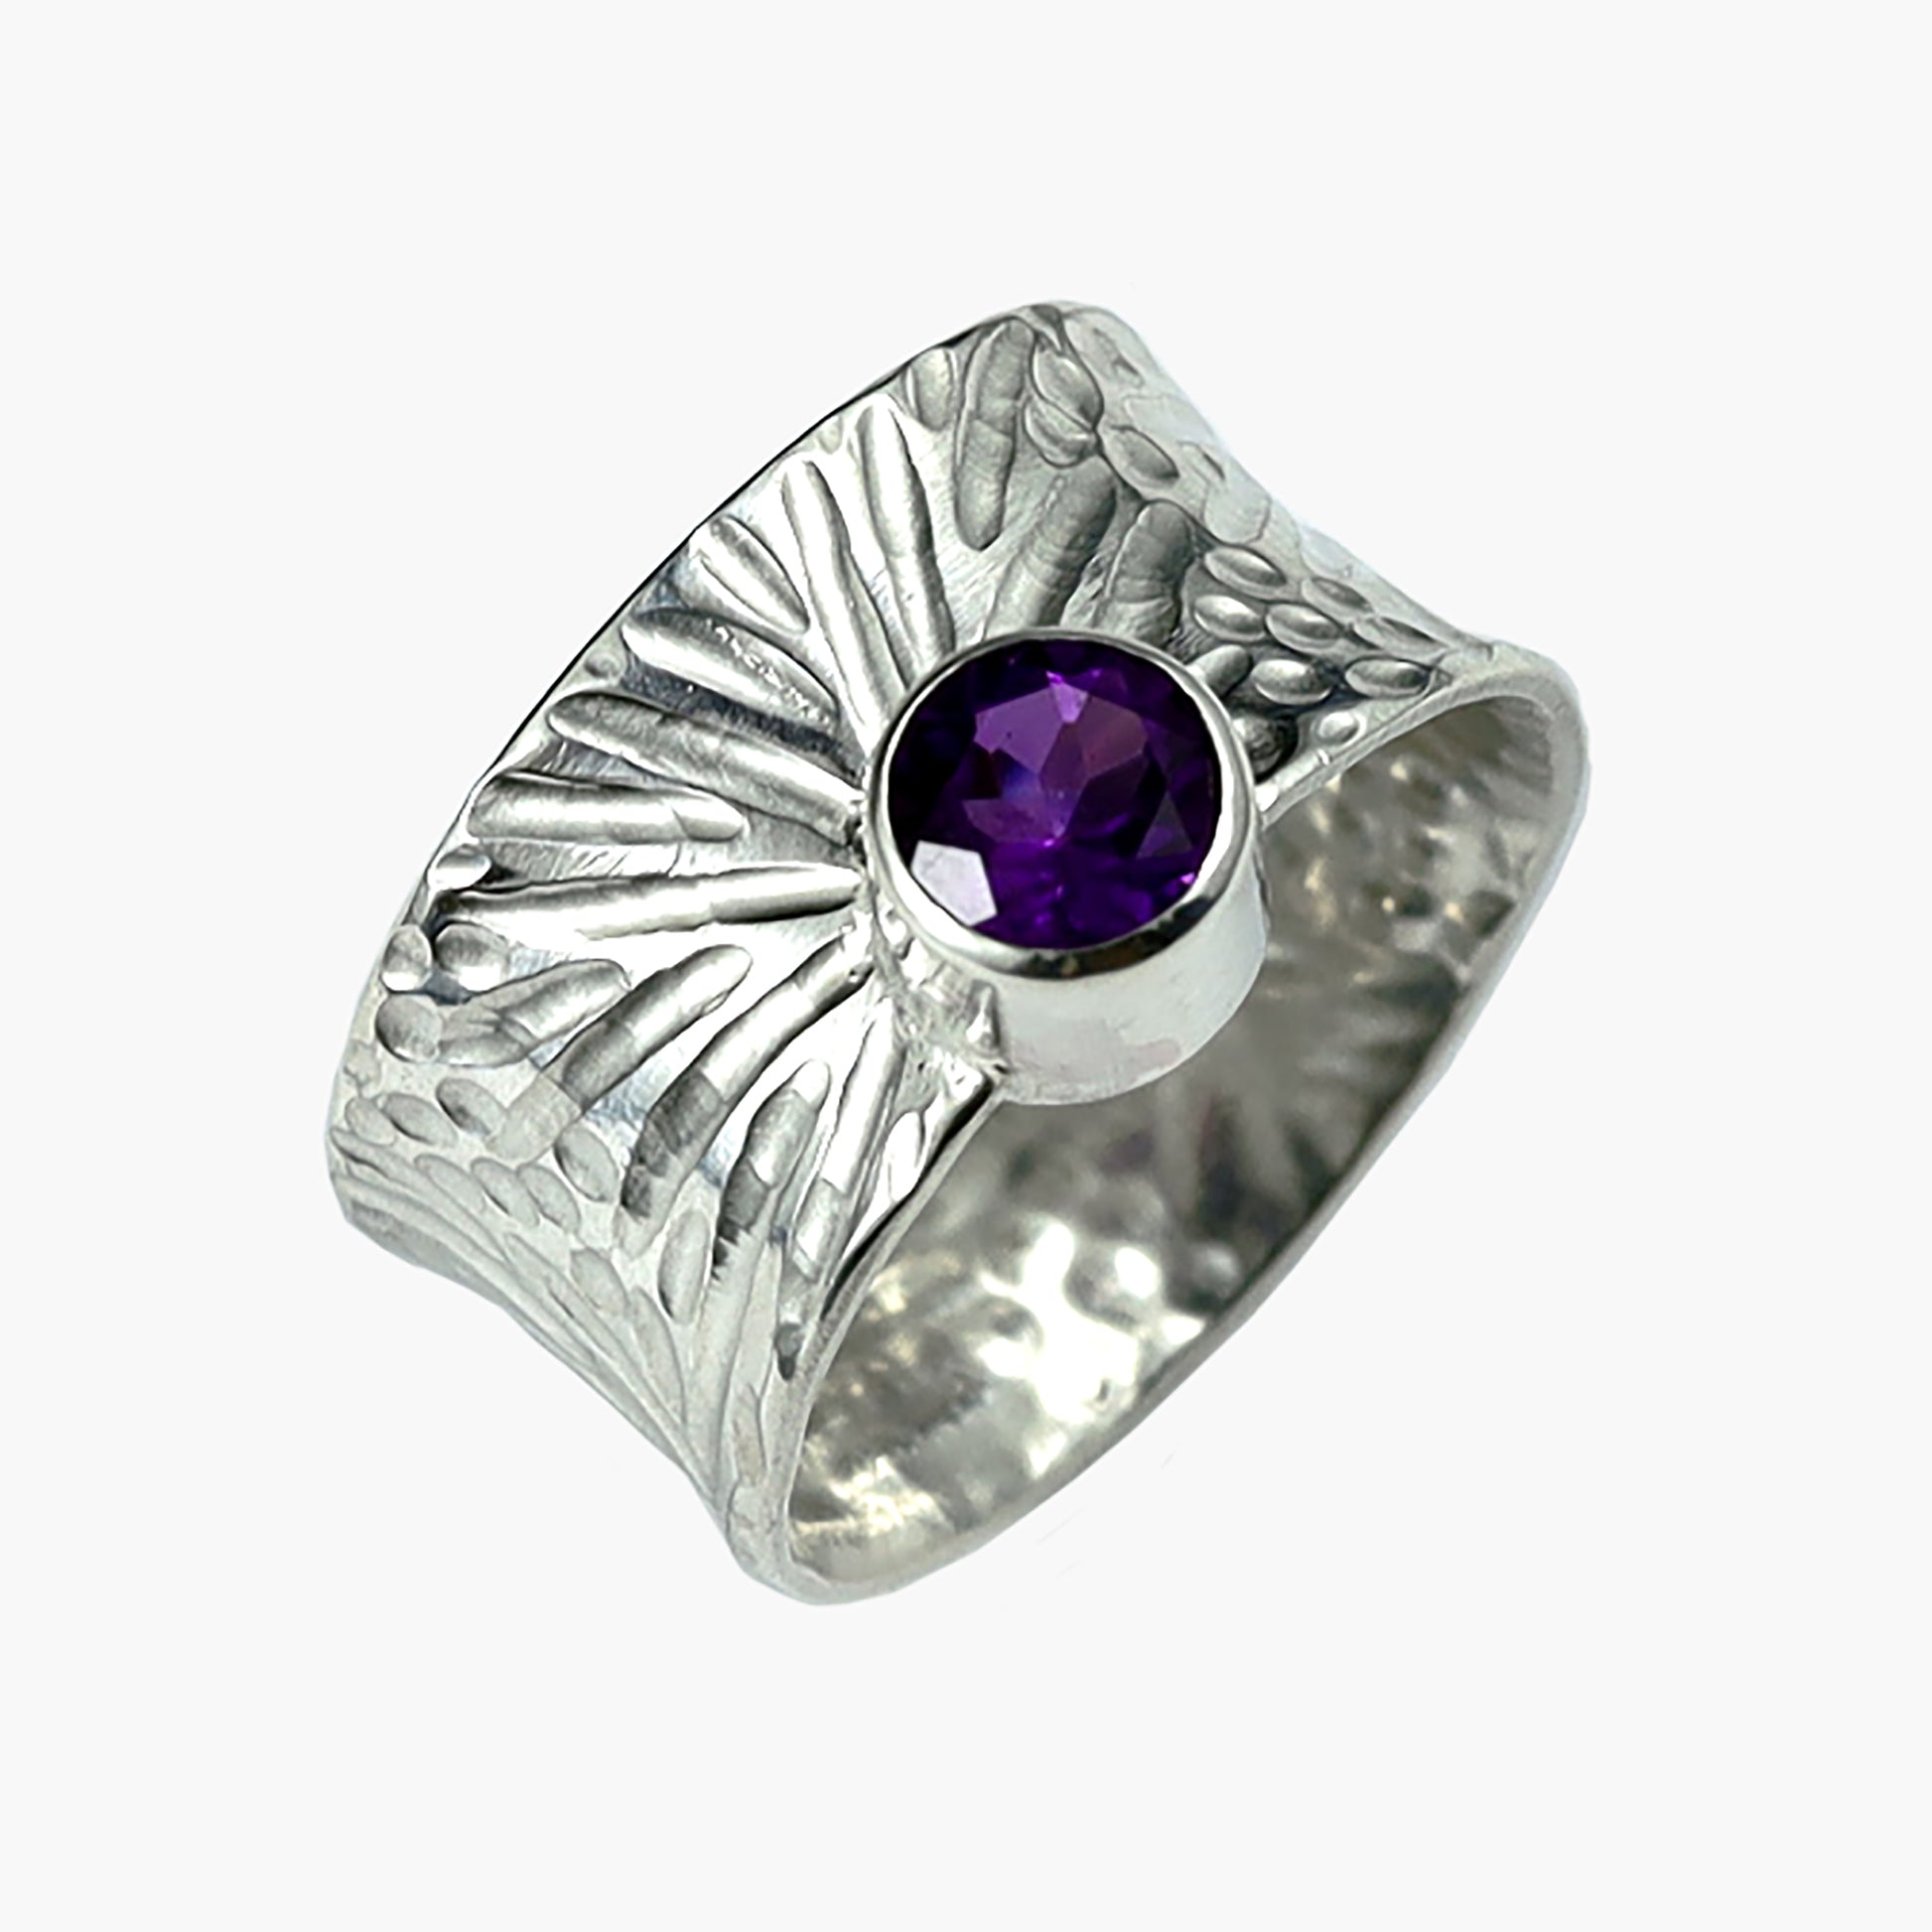 Close-up of the 'Spring' sterling silver ring by Erin Christensen, showcasing a wide band with a textured burst design, highlighted by a vibrant gemstone. The convex shape and intricate hand-chased detailing add to its unique aesthetic. Available in two sizes with gemstone options including bright purple amethyst.